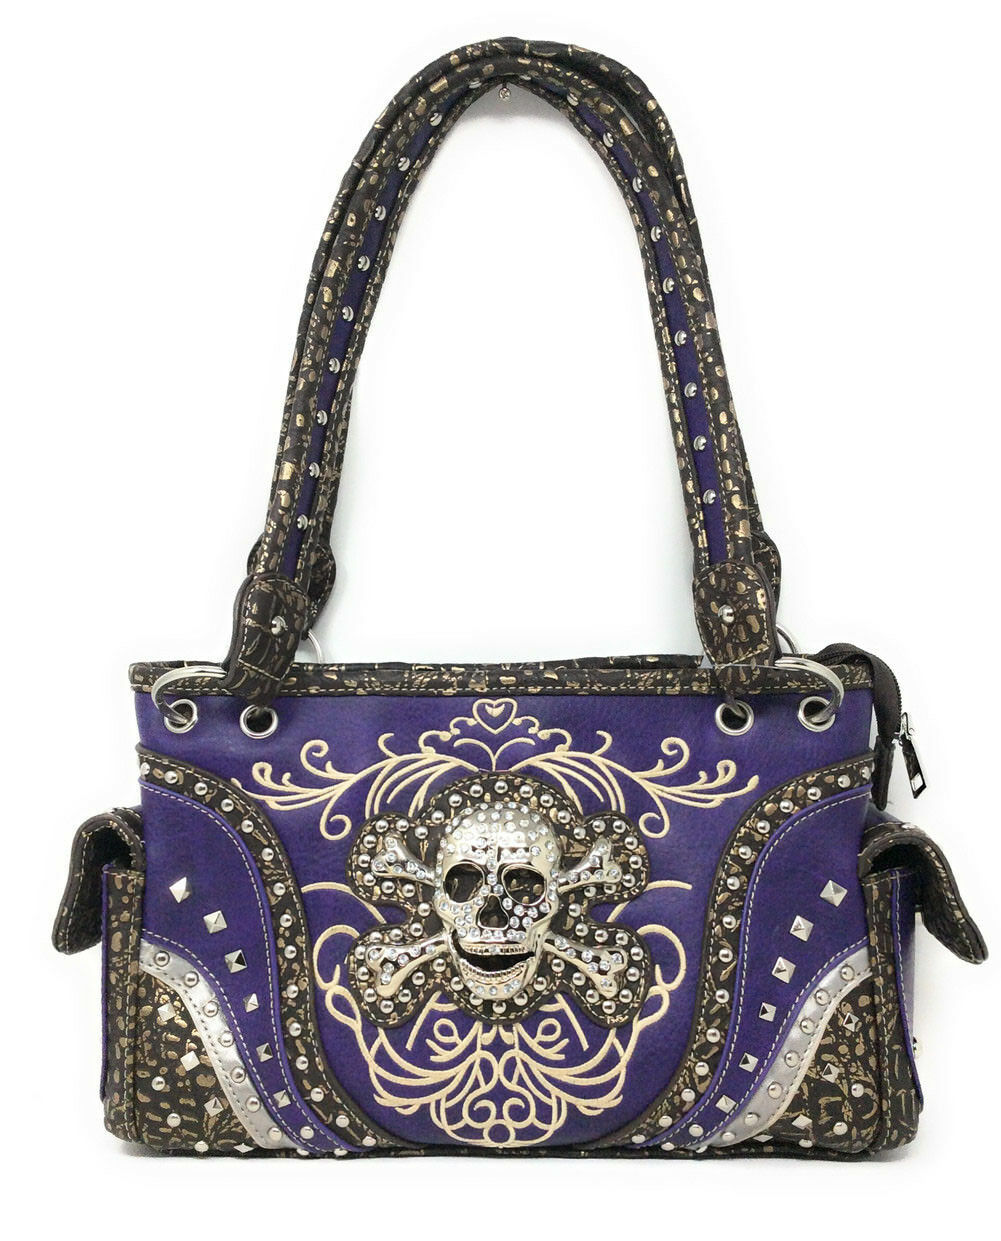 Texas West Embroidered-Concealed-Carry-Rhinestone-Skull Handbag set in 4 colors